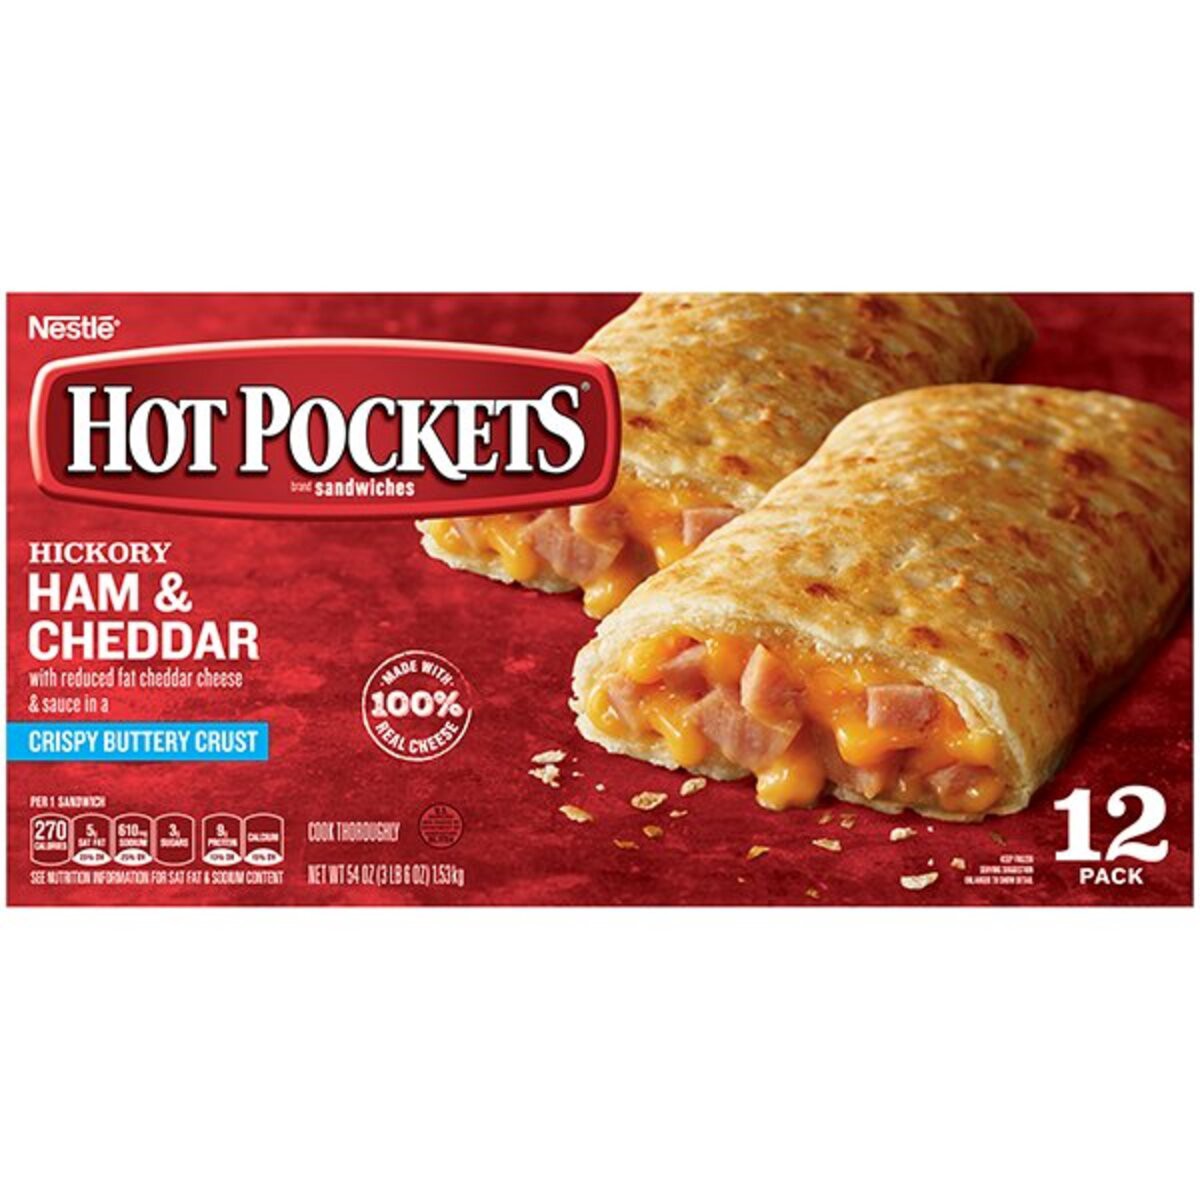 slide 4 of 8, Hot Pockets Hickory Ham & Cheddar Frozen Snacks in a Crispy Buttery Crust, Frozen Ham and Cheese Sandwiches, 12 Count, 12 ct